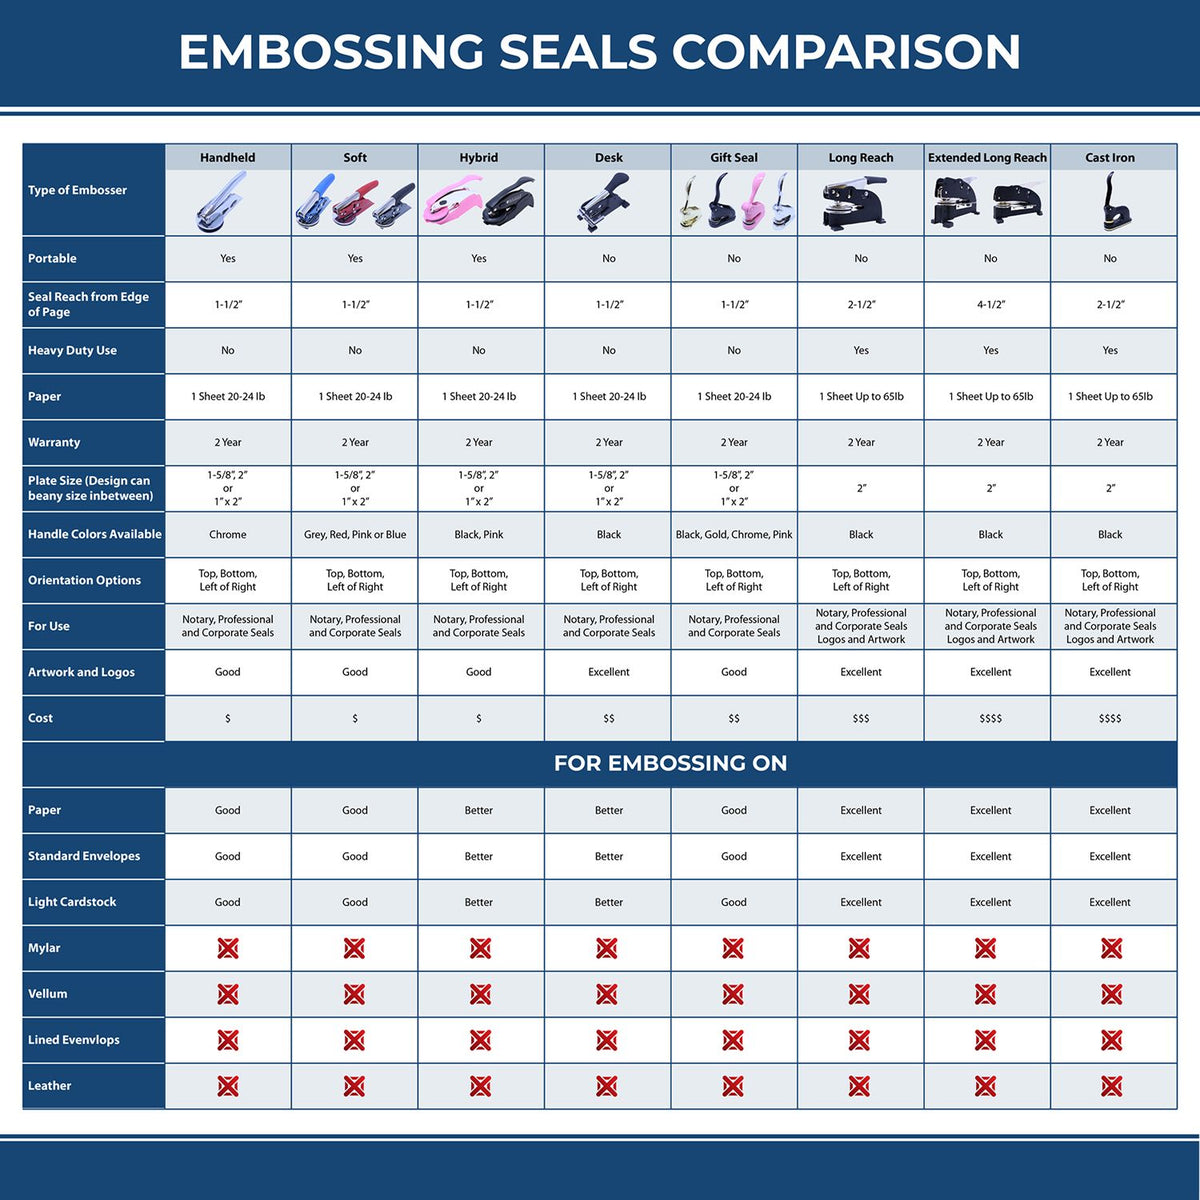 A comparison chart for the different types of mount models available for the Soft Wyoming Professional Engineer Seal.